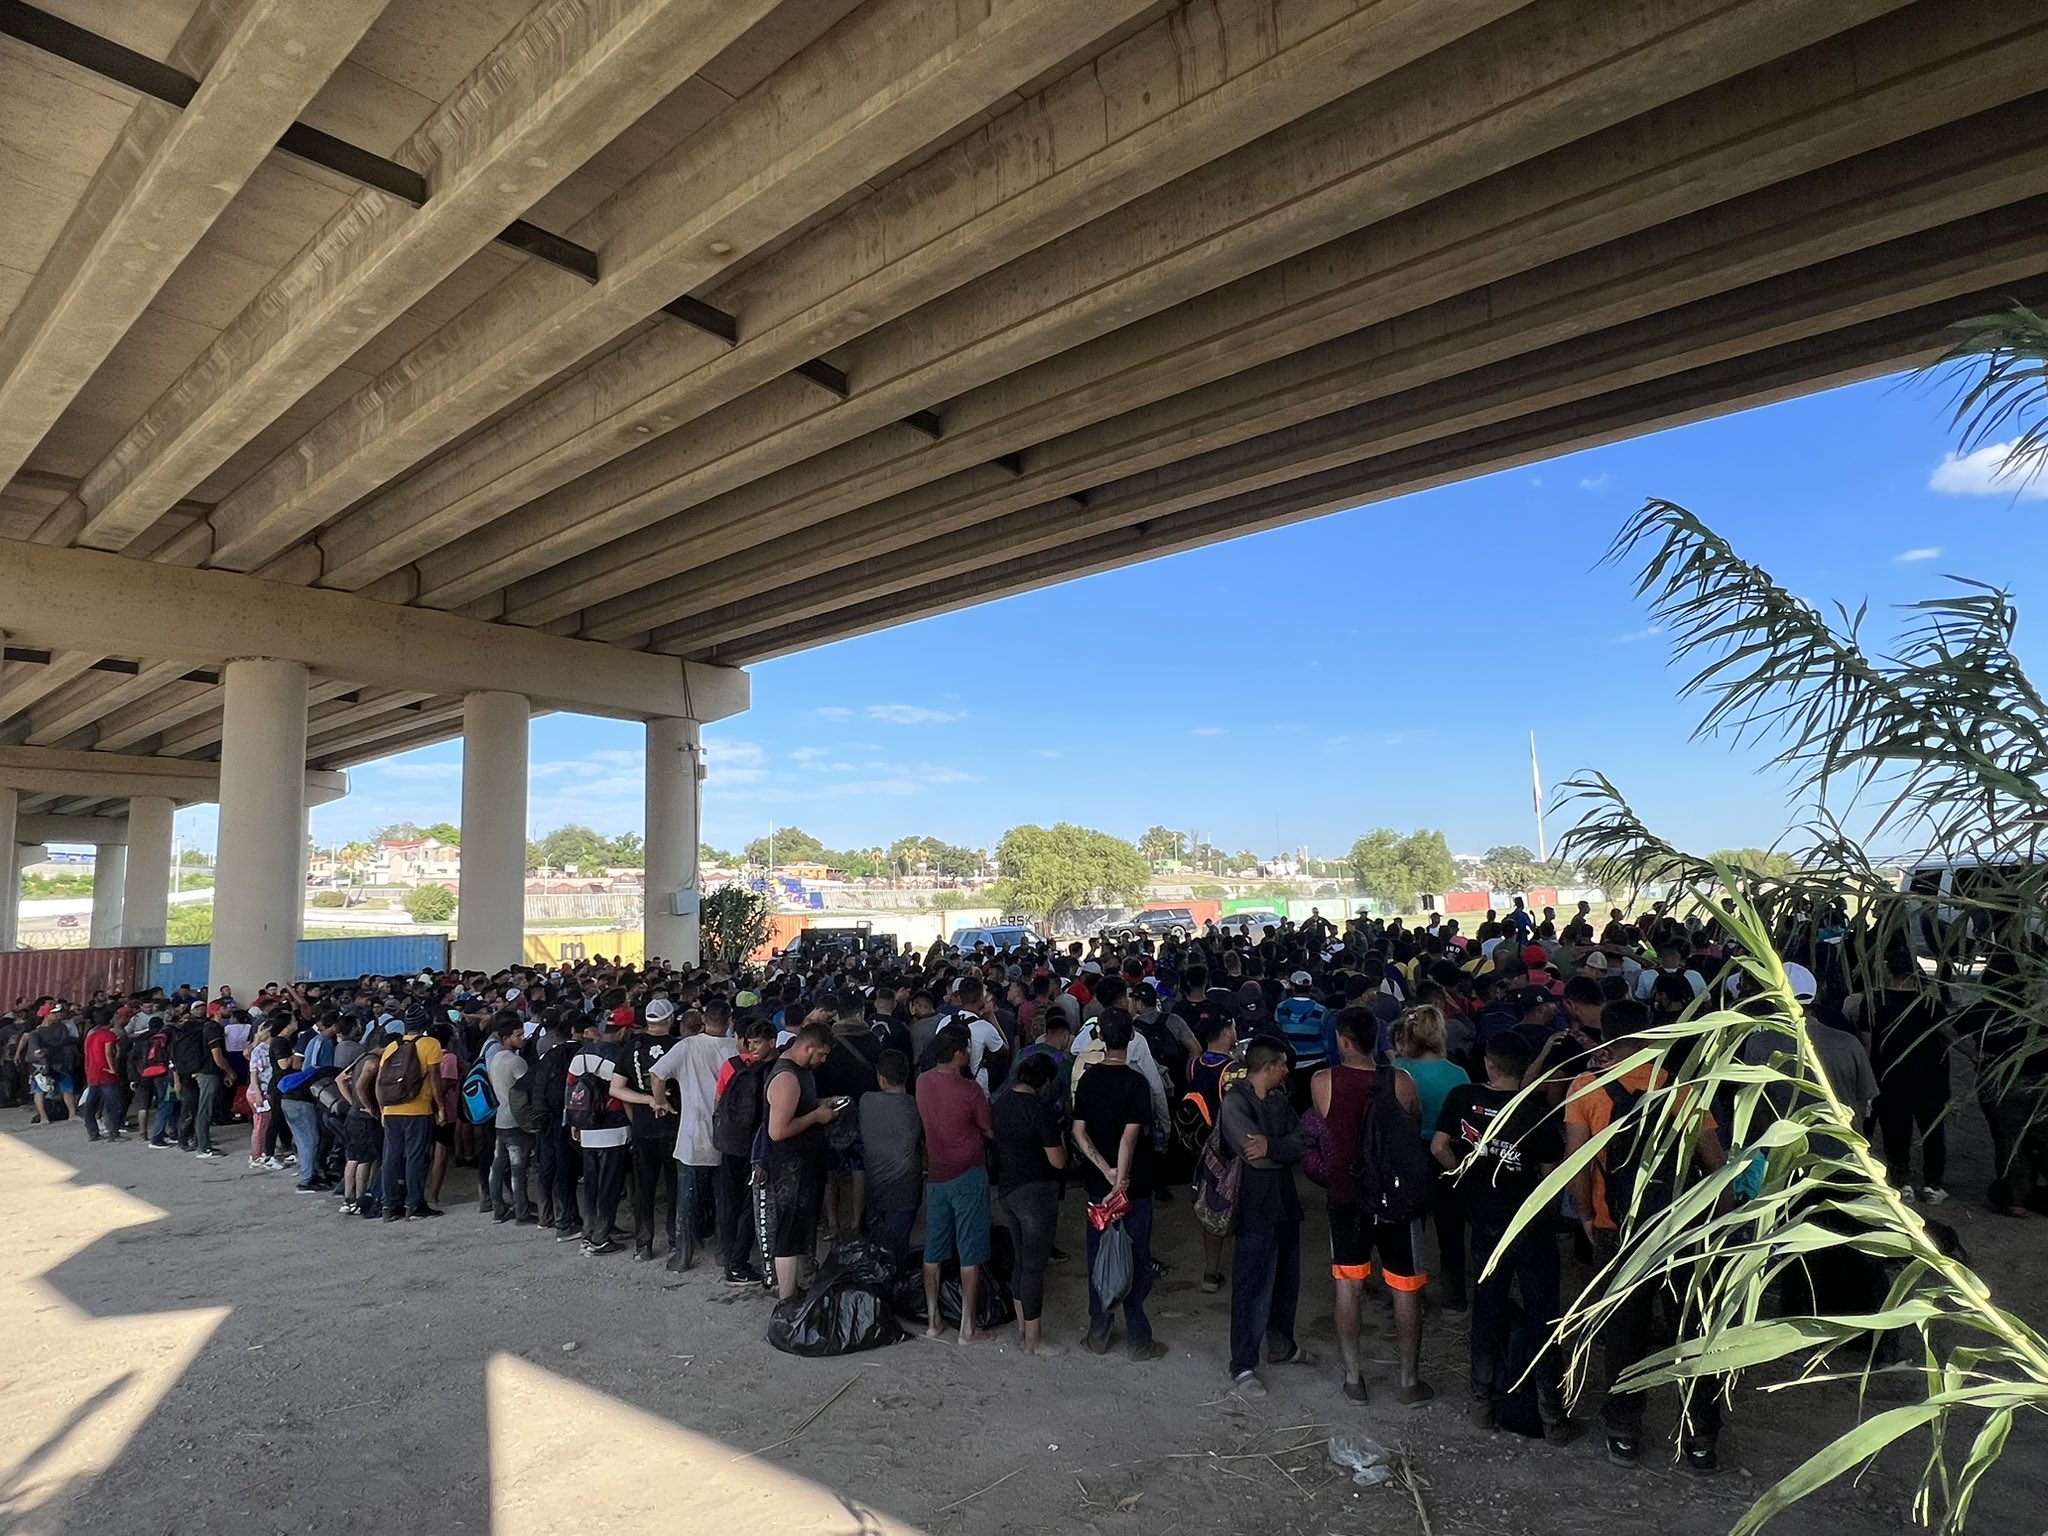 Illegal migrants waiting under an overpass.